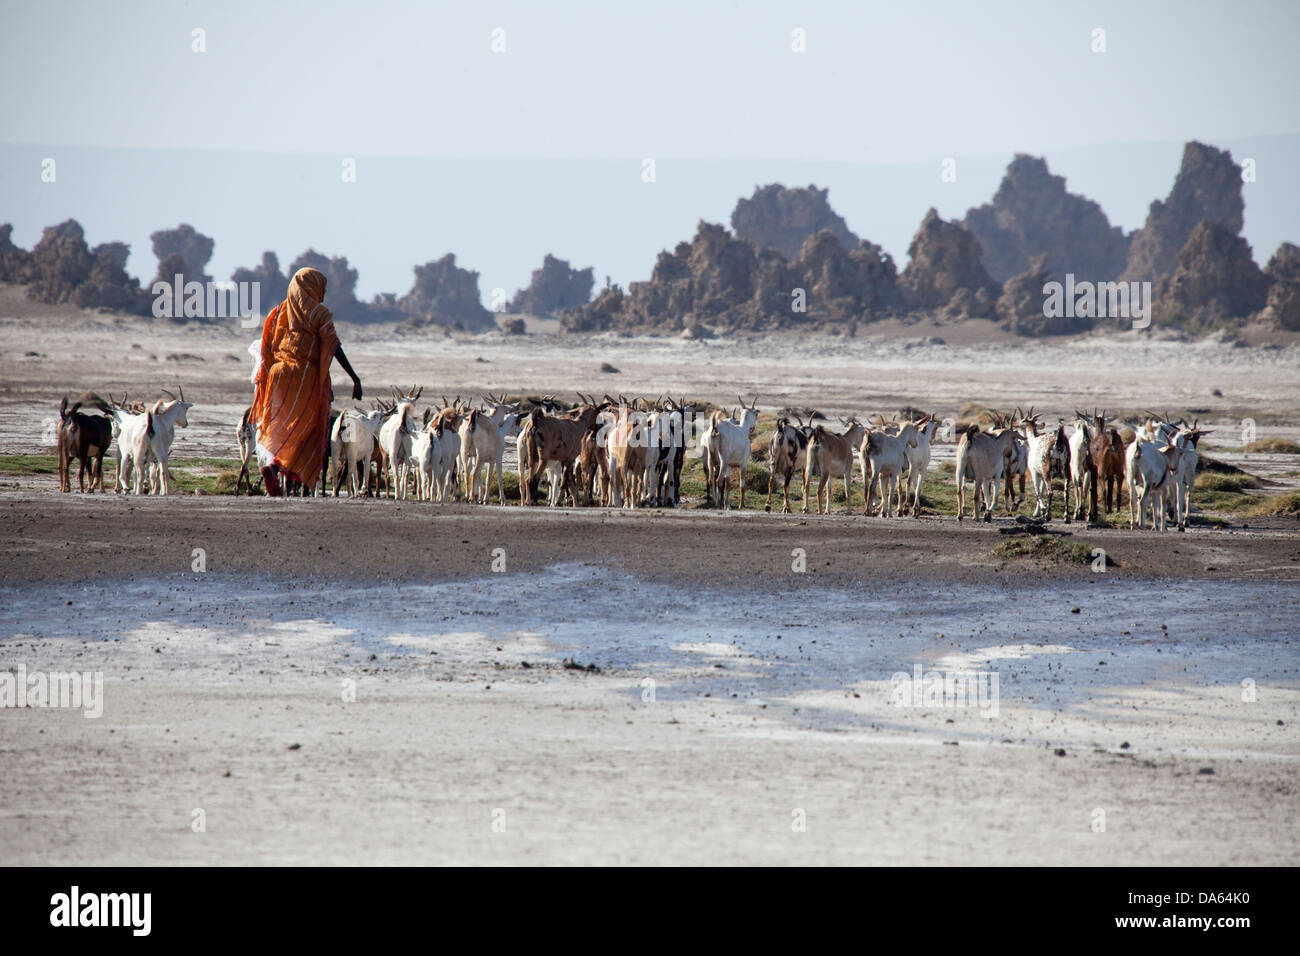 herd of goats, goats, nanny goats, Abbesee, Djibouti, Africa, scenery, landscape, nature, lake, lakes, agriculture, shepherd Stock Photo